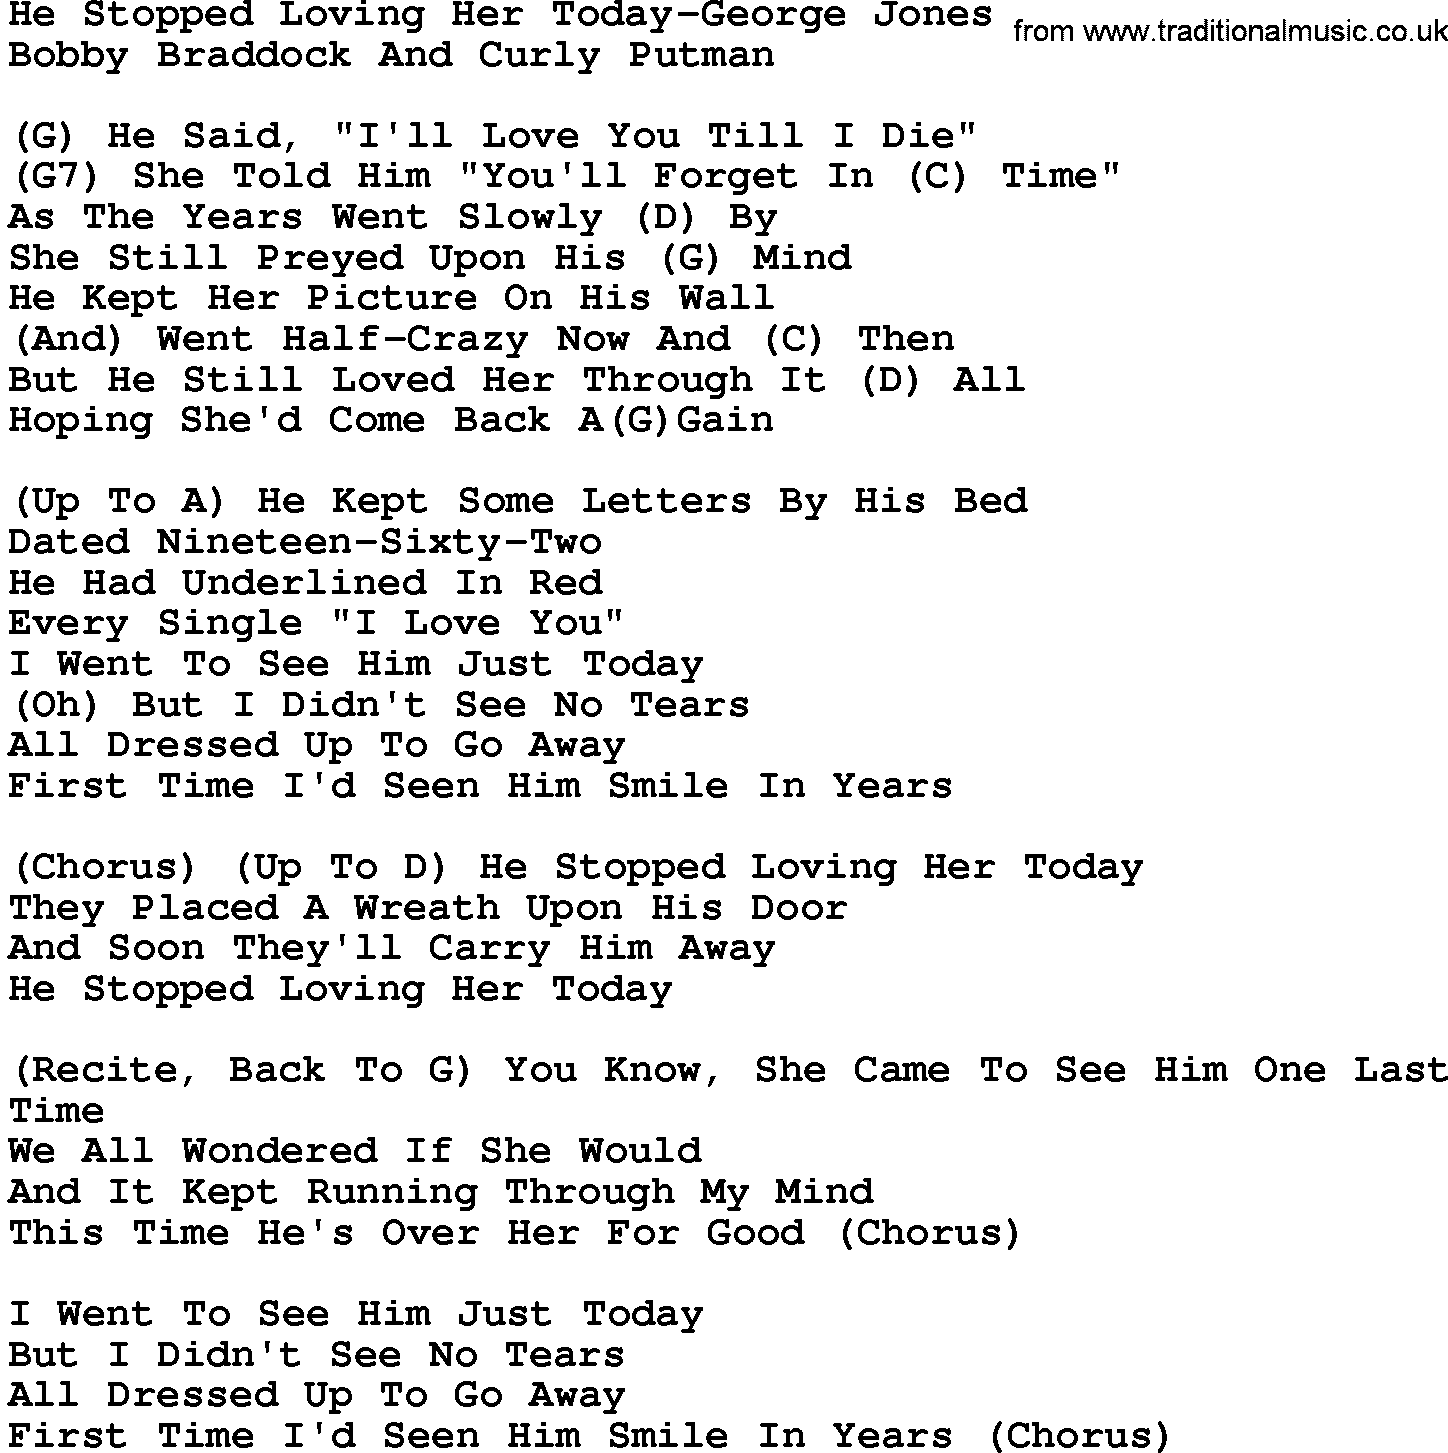 Country music song: He Stopped Loving Her Today-George Jones lyrics and chords